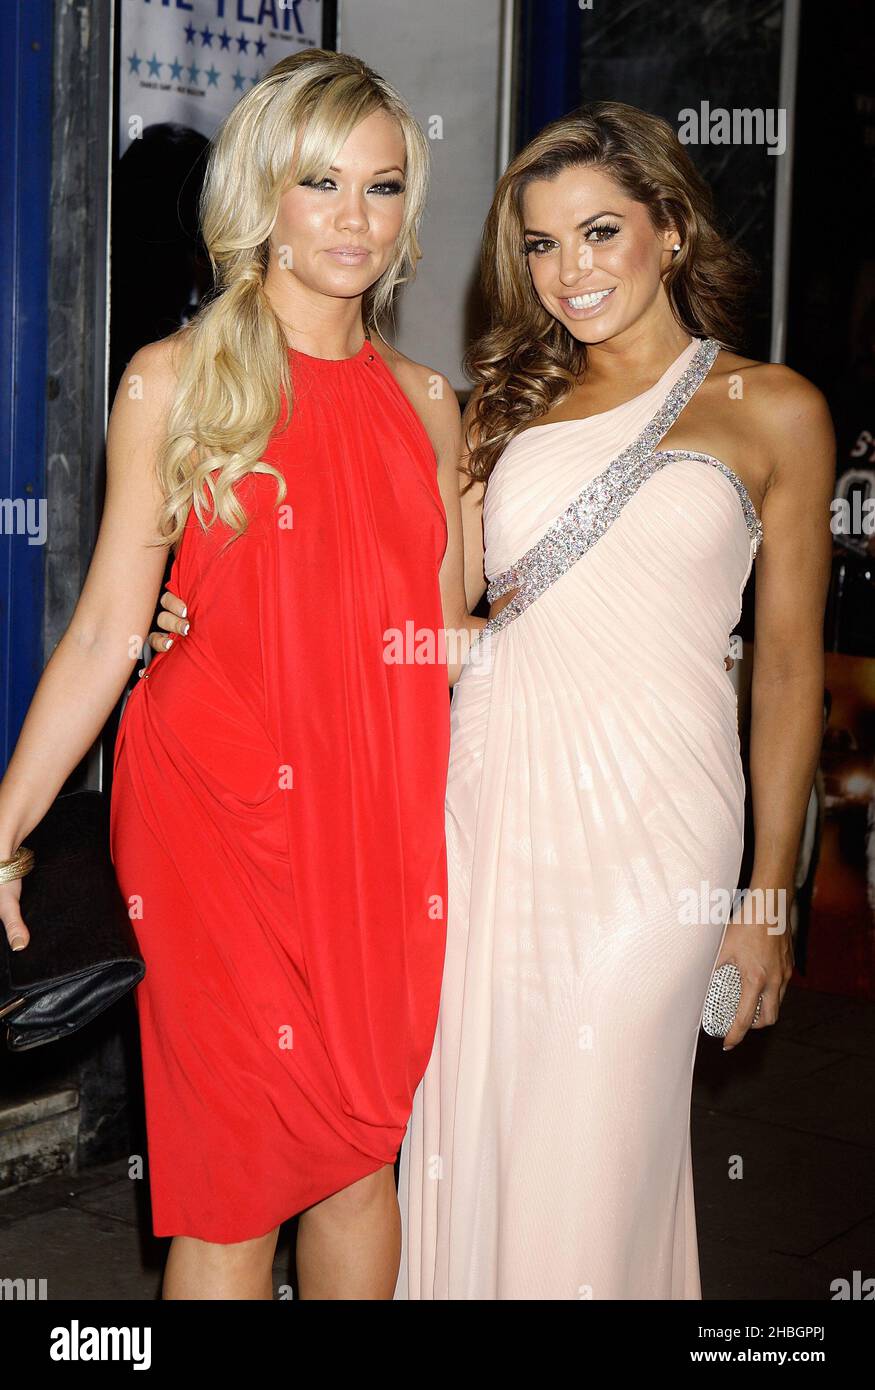 Model Sara Beverley Jones and Louise Glover attending the world premiere of 'Deviation' at Odeon Cinema in Covent Garden, London. Stock Photo